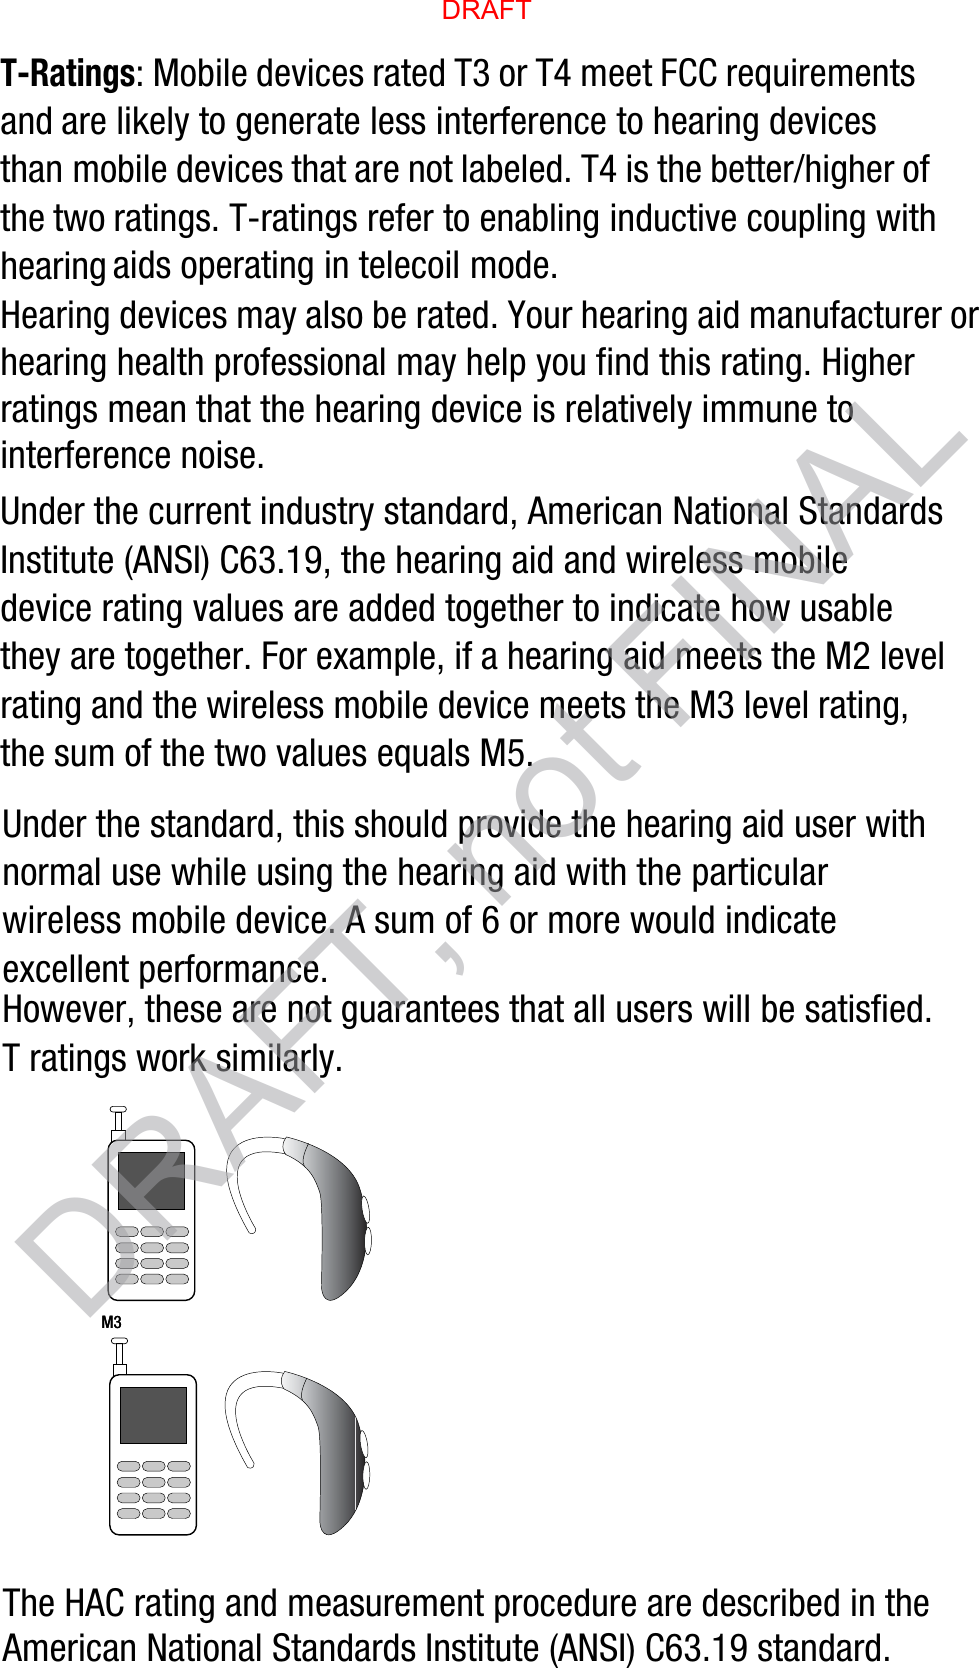 T-Ratings: Mobile devices rated T3 or T4 meet FCC requirements and are likely to generate less interference to hearing devices than mobile devices that are not labeled. T4 is the better/higher of the two ratings. T-ratings refer to enabling inductive coupling with hearing aids operating in telecoil mode.Hearing devices may also be rated. Your hearing aid manufacturer or hearing health professional may help you find this rating. Higher ratings mean that the hearing device is relatively immune to interference noise. Under the current industry standard, American National Standards Institute (ANSI) C63.19, the hearing aid and wireless mobile device rating values are added together to indicate how usable they are together. For example, if a hearing aid meets the M2 level rating and the wireless mobile device meets the M3 level rating, the sum of the two values equals M5. Under the standard, this should provide the hearing aid user with normal use while using the hearing aid with the particular wireless mobile device. A sum of 6 or more would indicate excellent performance.  However, these are not guarantees that all users will be satisfied. T ratings work similarly.The HAC rating and measurement procedure are described in the American National Standards Institute (ANSI) C63.19 standard.M3       M3DRAFTDRAFT, not FINAL